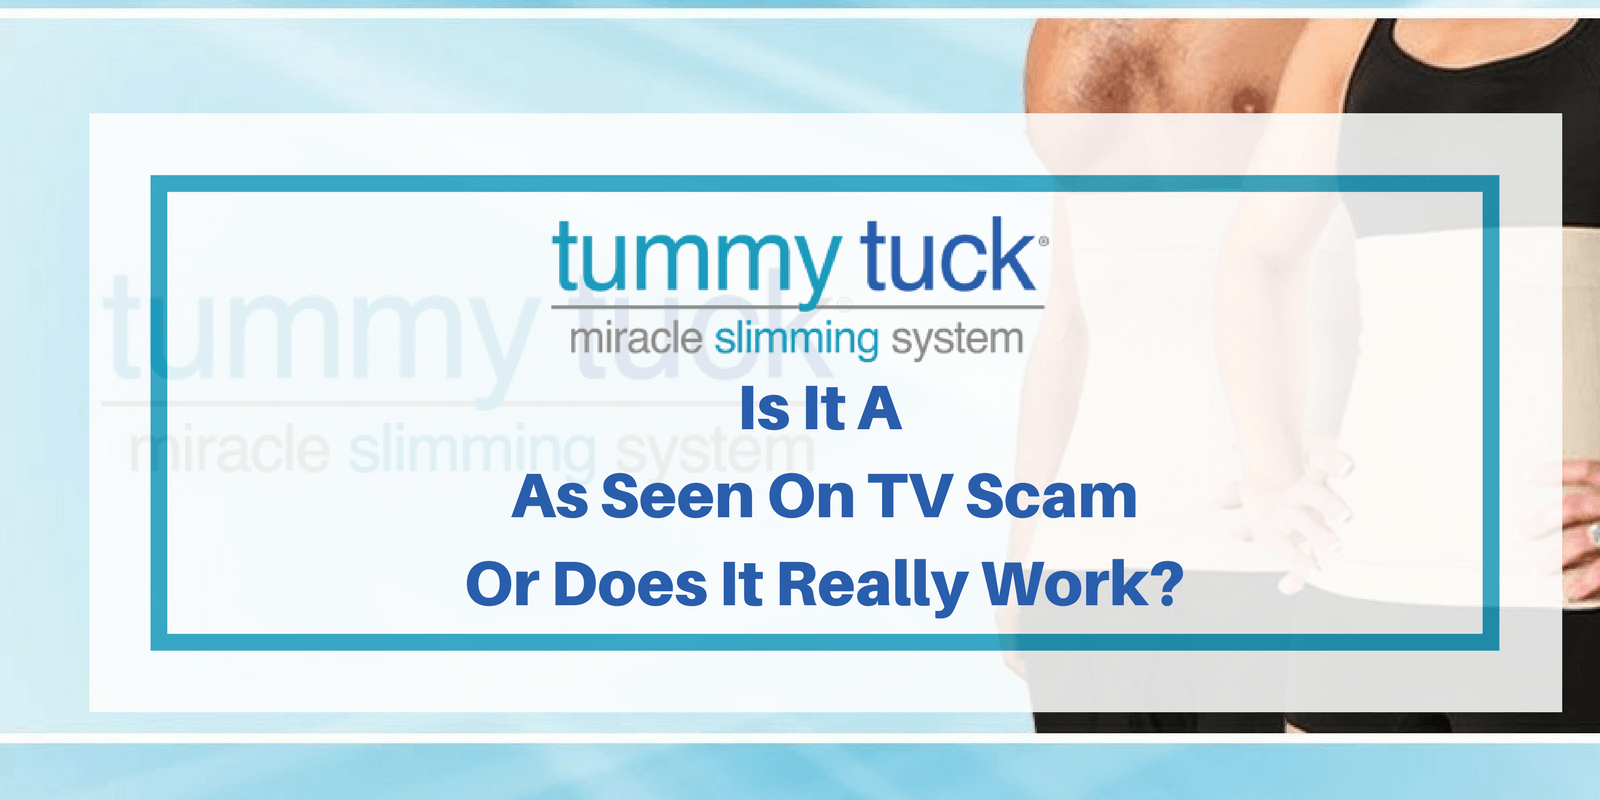 Tummy Tuck Miracle Slimming System Review